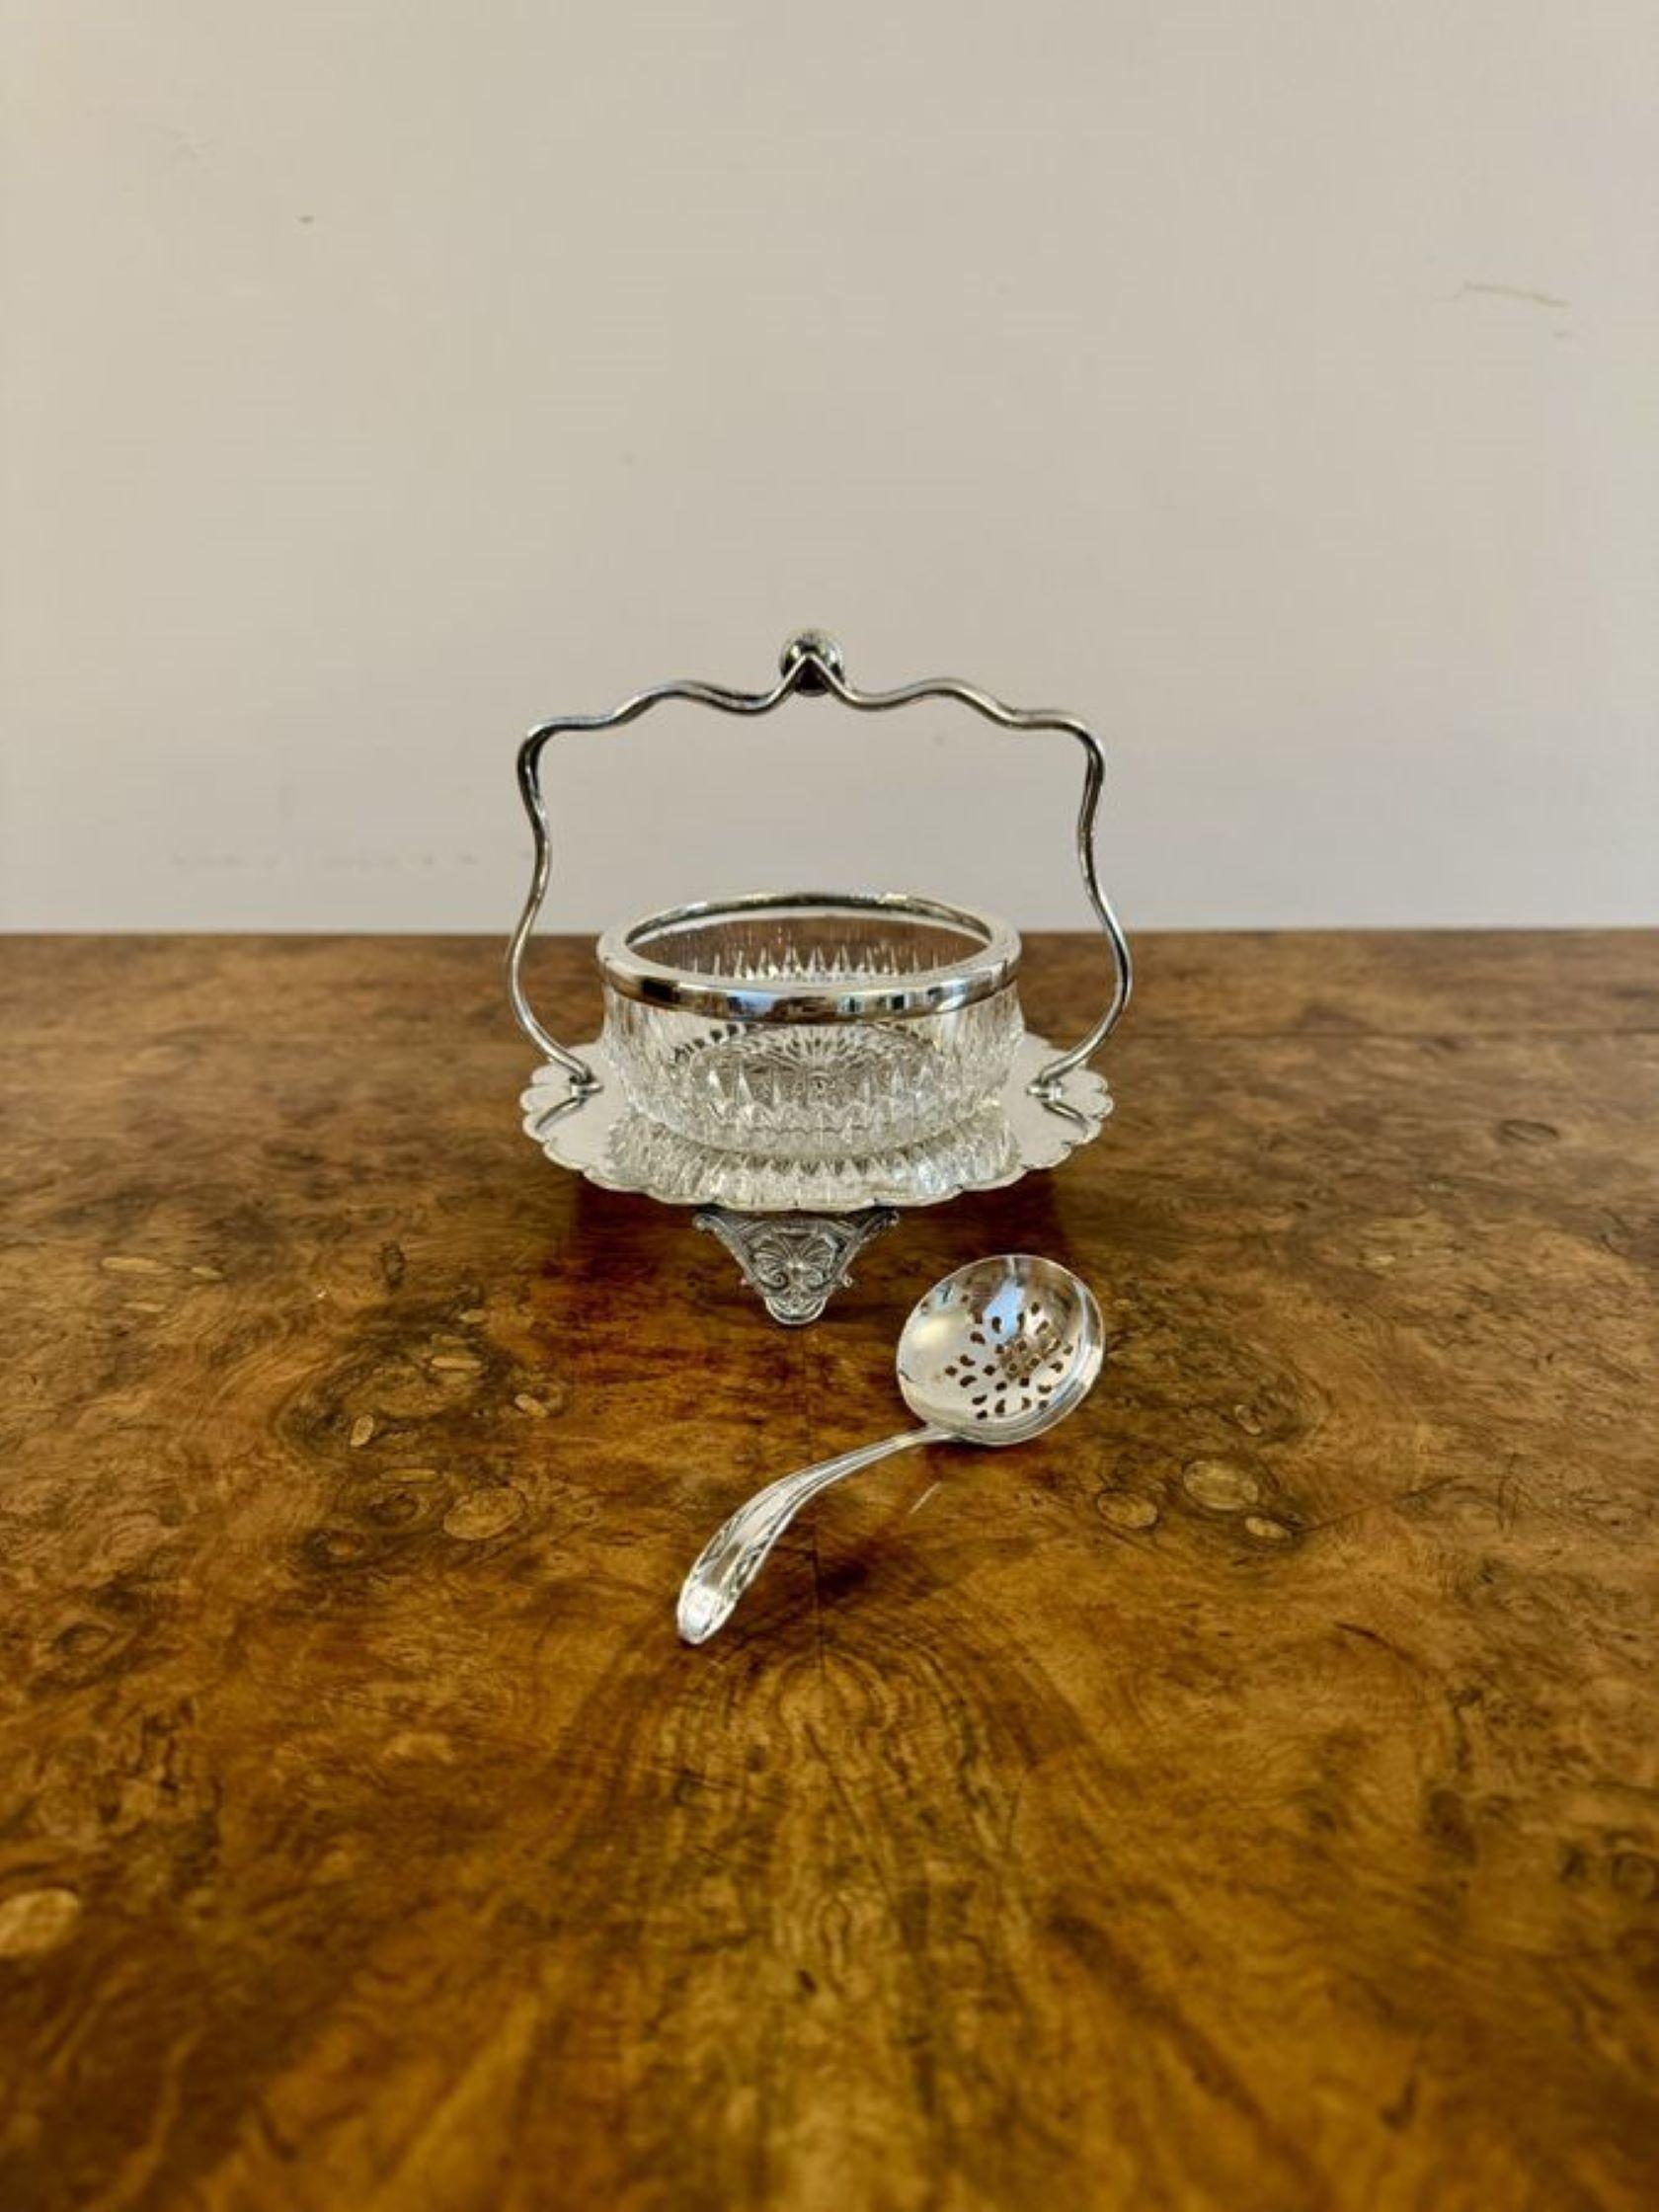 Elegant antique Edwardian silver plated jam pot and spoon, having an elegant cut glass jam pot with a silver plated rim standing on a silver plated stand with a shaped handle to the top raised on three ornate feet.

D. 1900